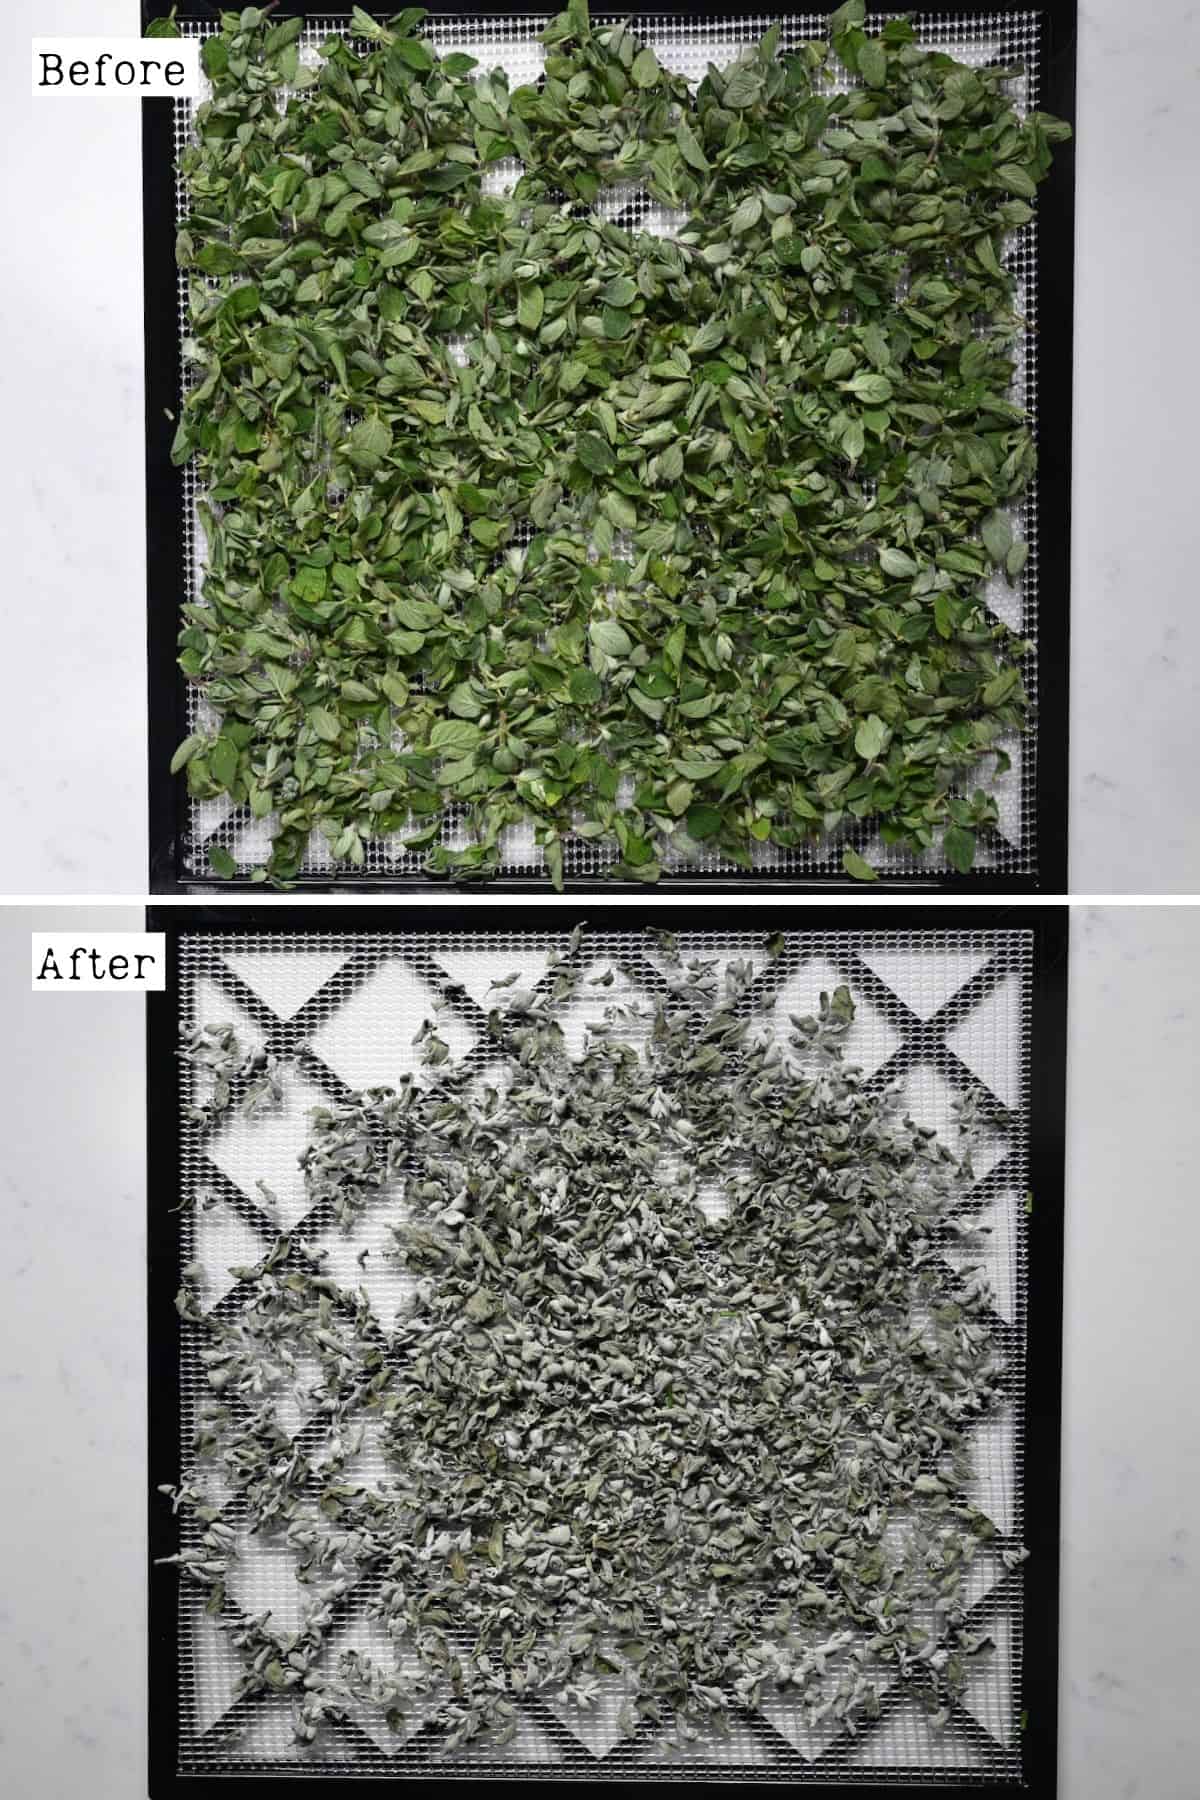 Before and after drying oregano